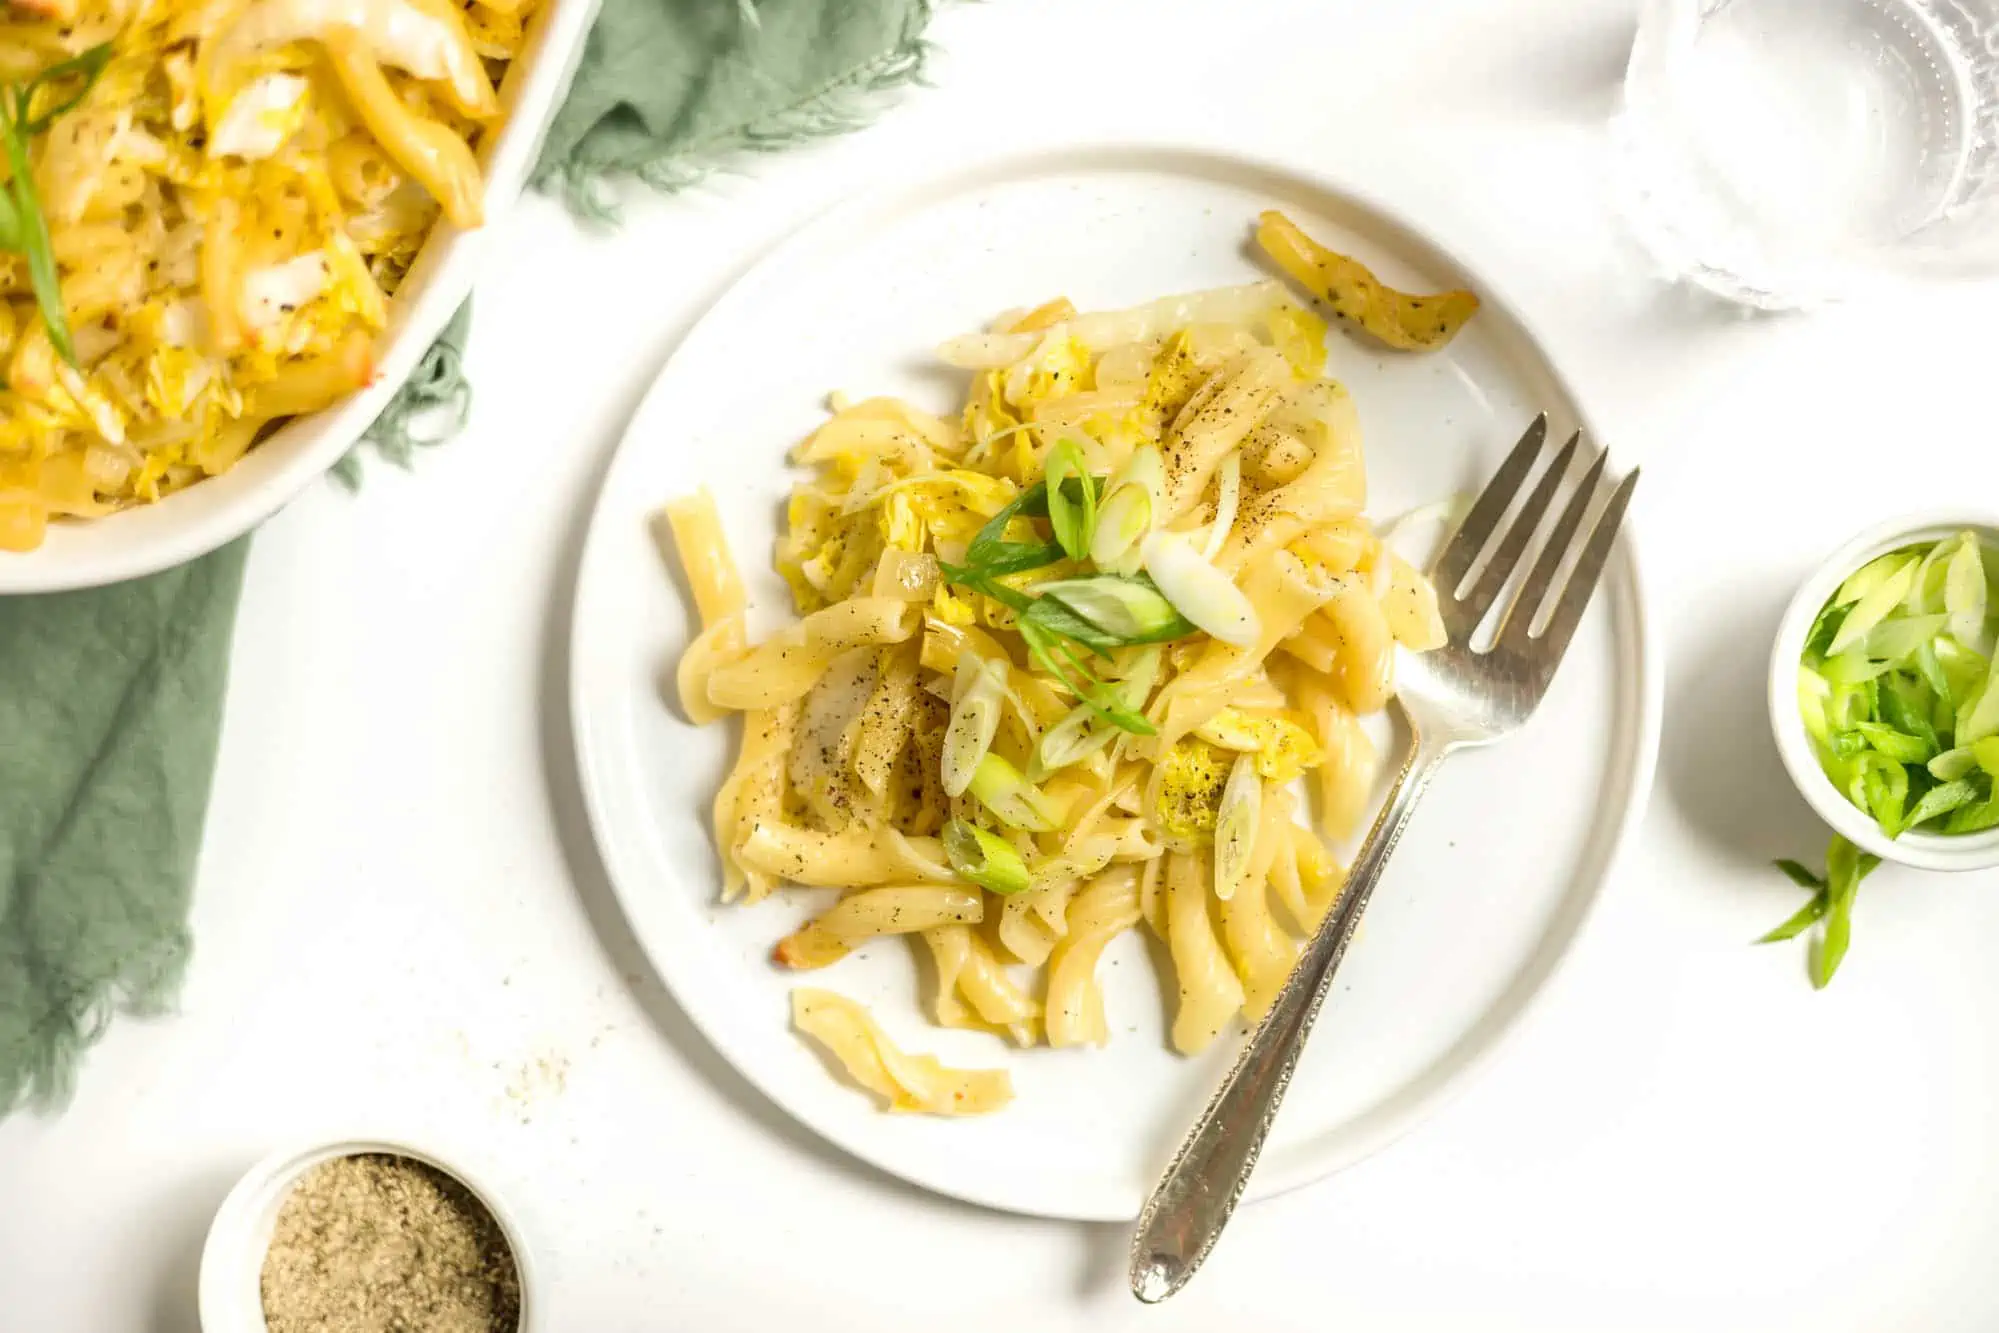 Vegan Cabbage and Noodles Casserole Served on a White Plate With Green Scallions